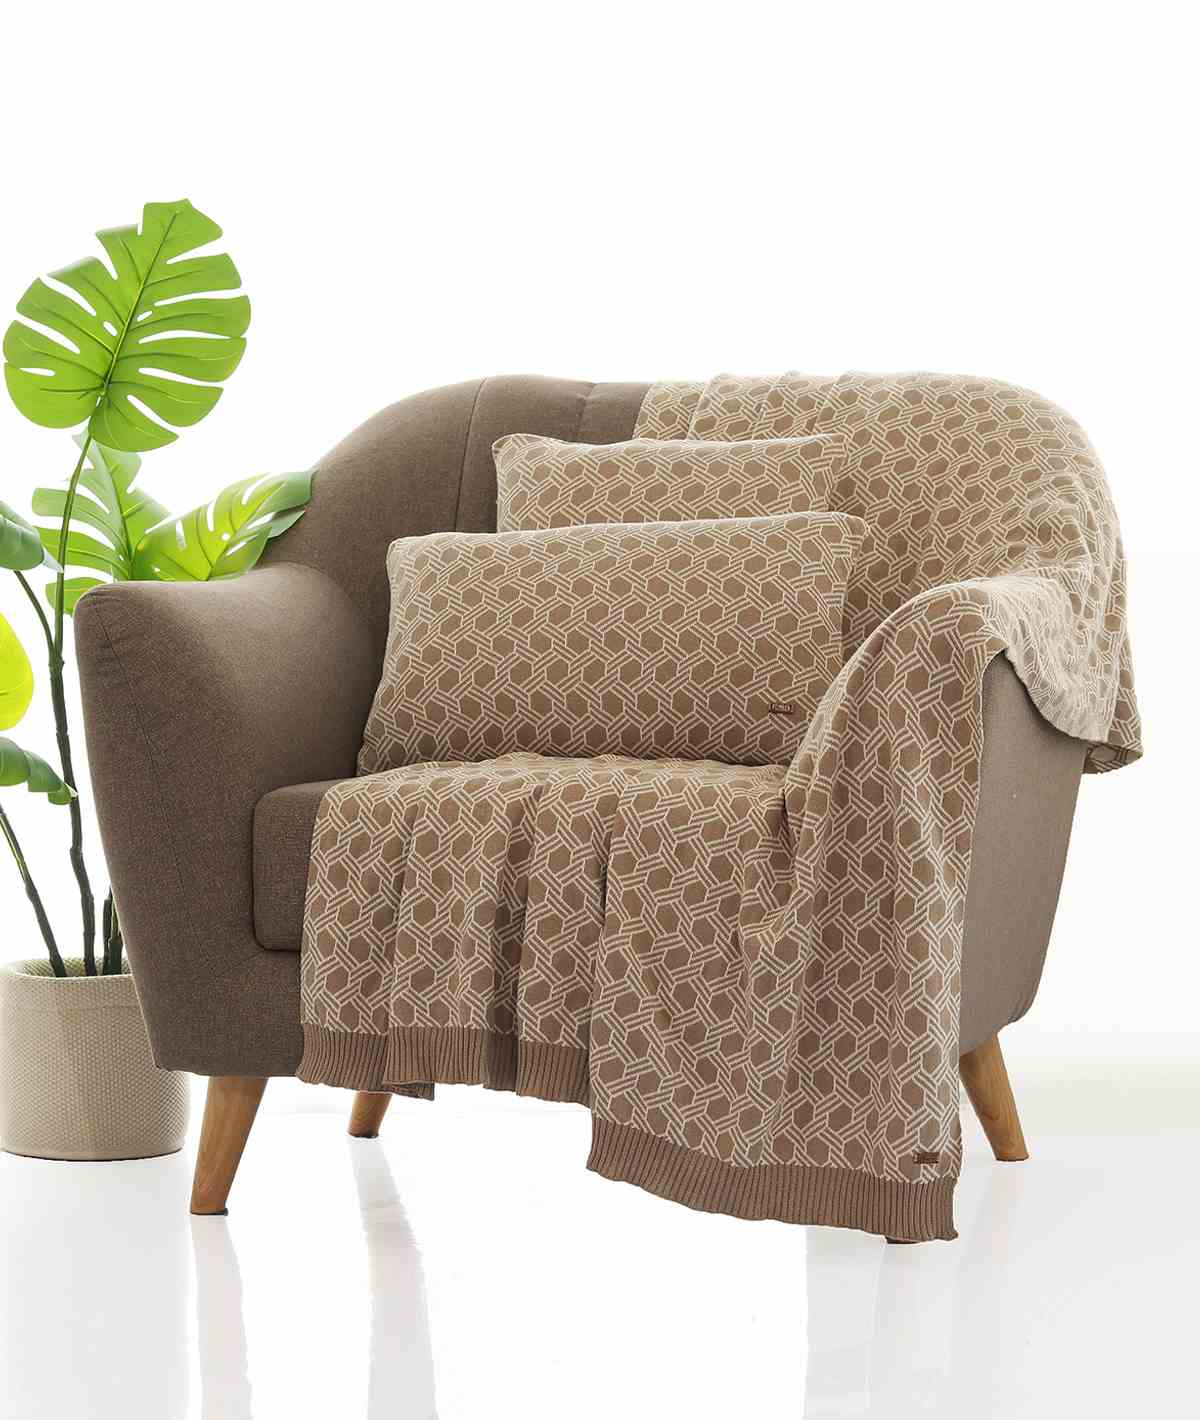 throw and cushion cover set